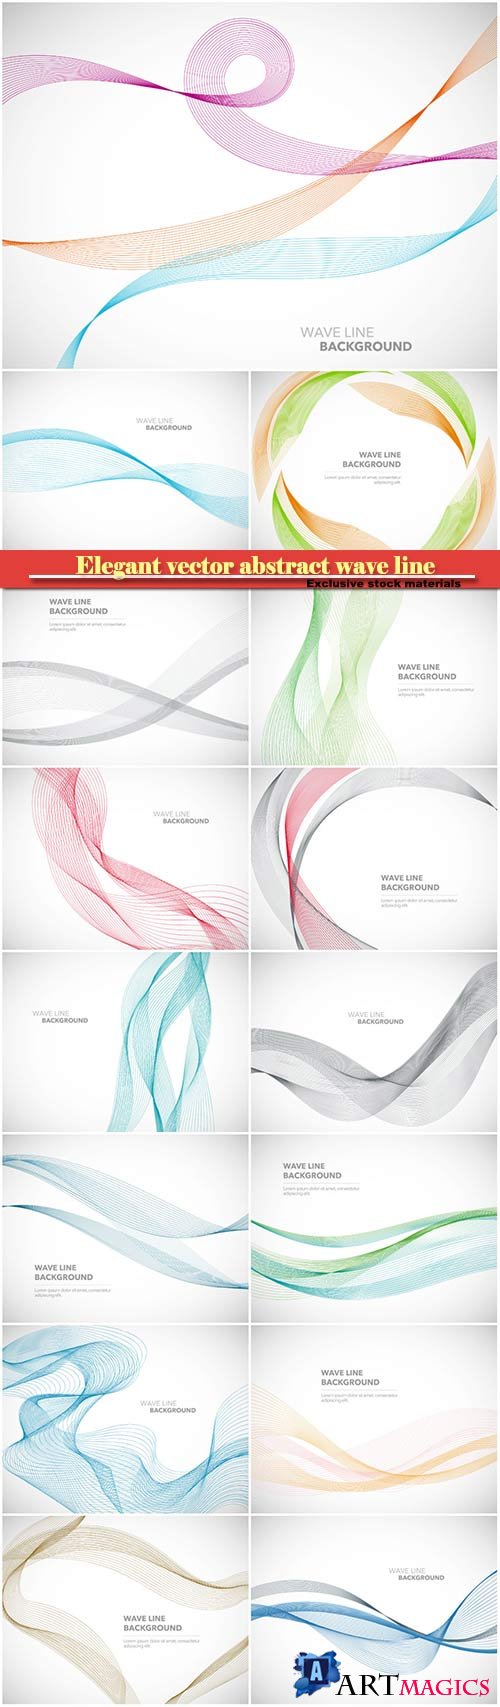 Elegant vector abstract wave line futuristic style background template